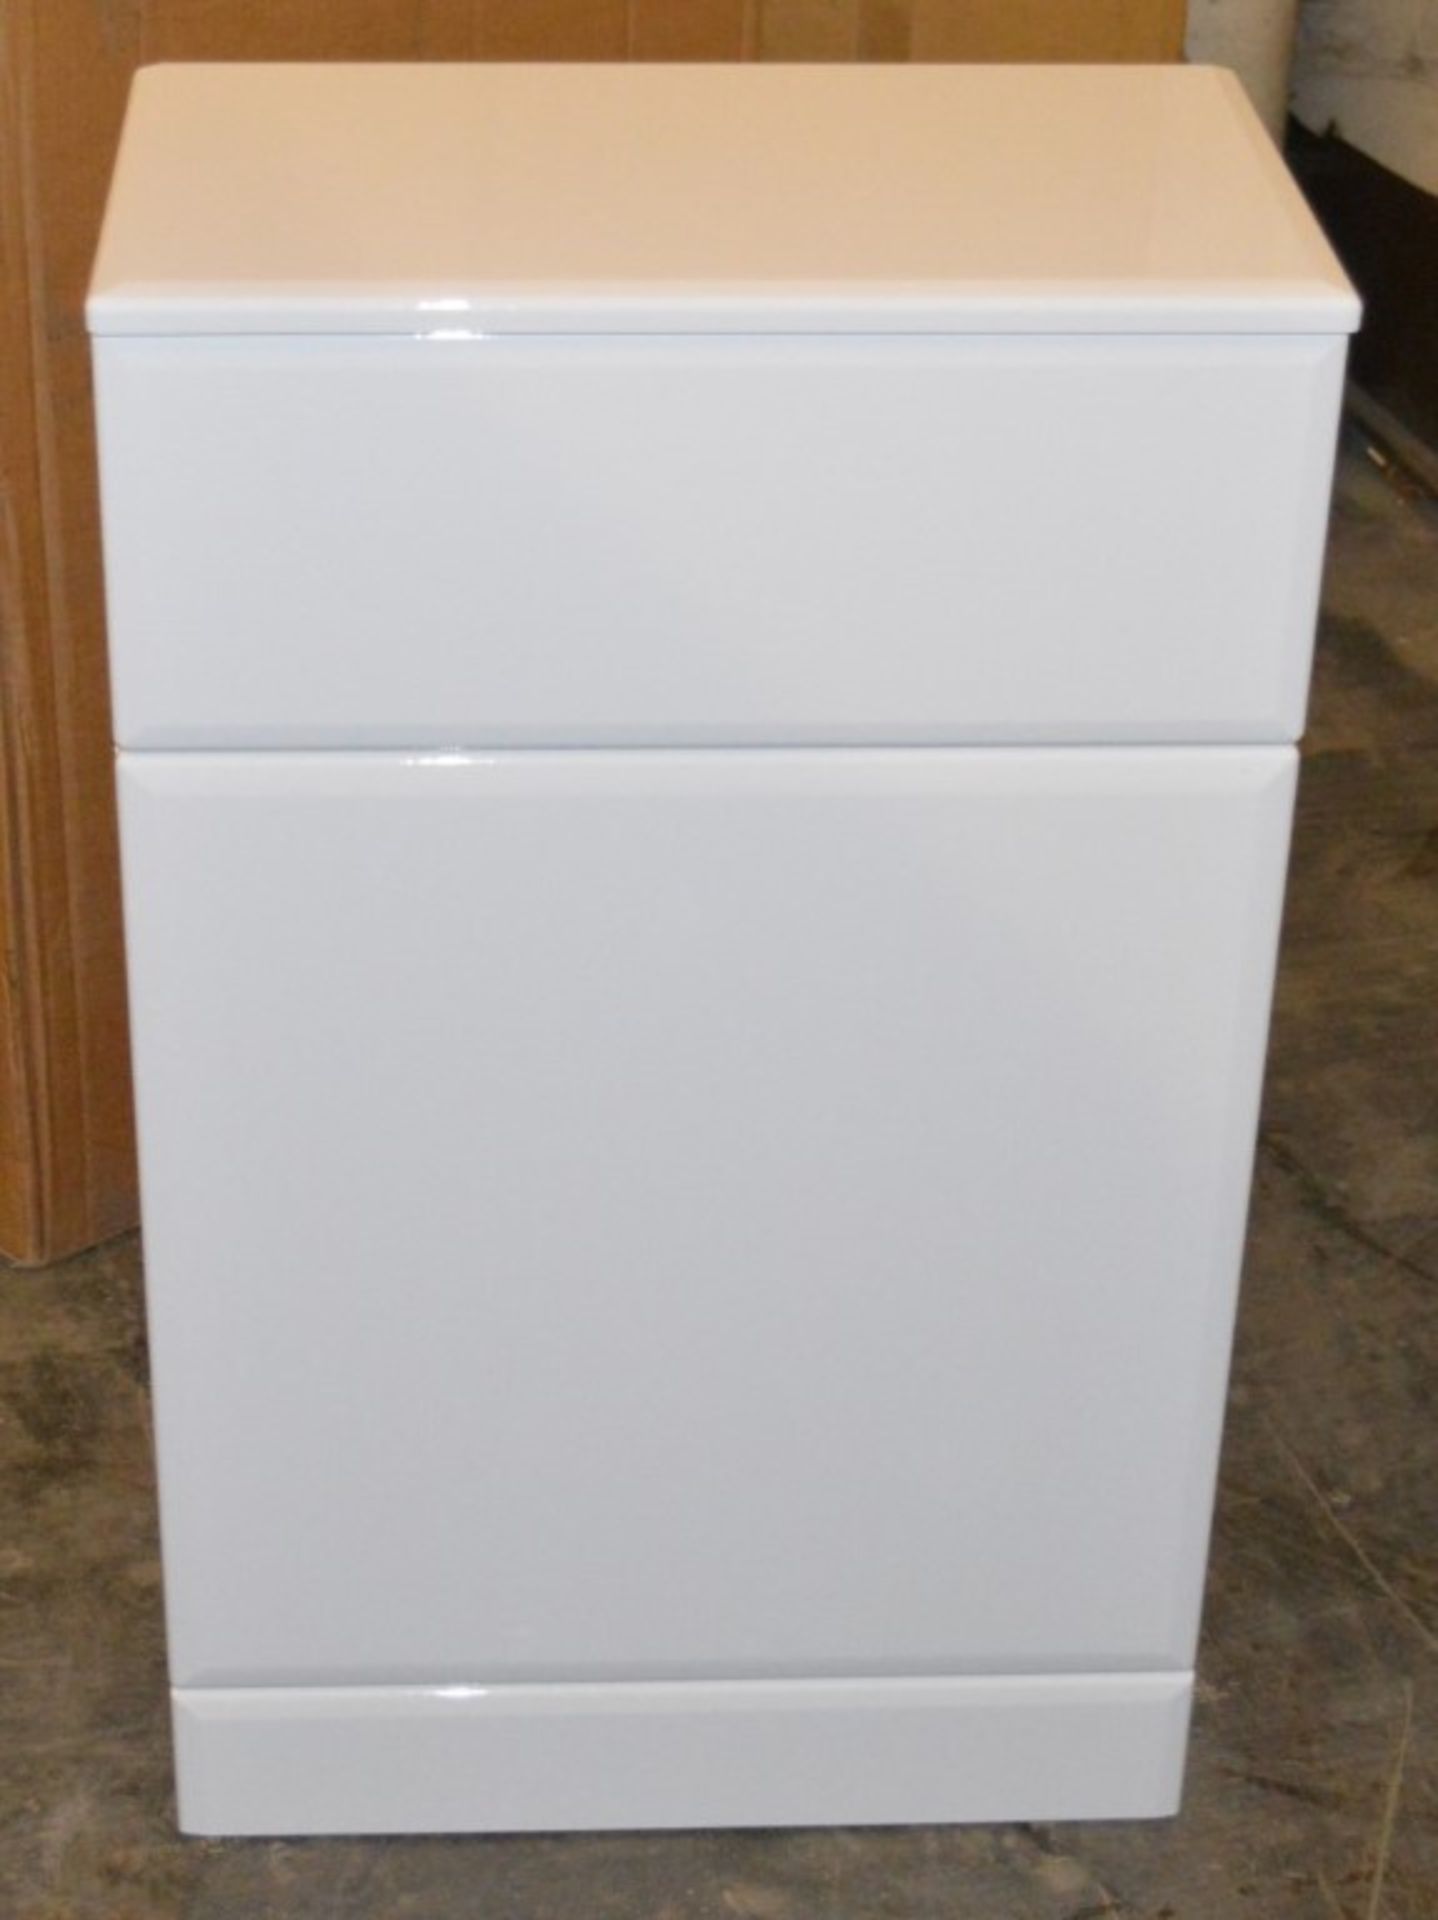 1 x Venizia BTW Toilet Pan Unit in White Gloss With Concealed Cistern - 500mm Width - Includes - Image 4 of 6